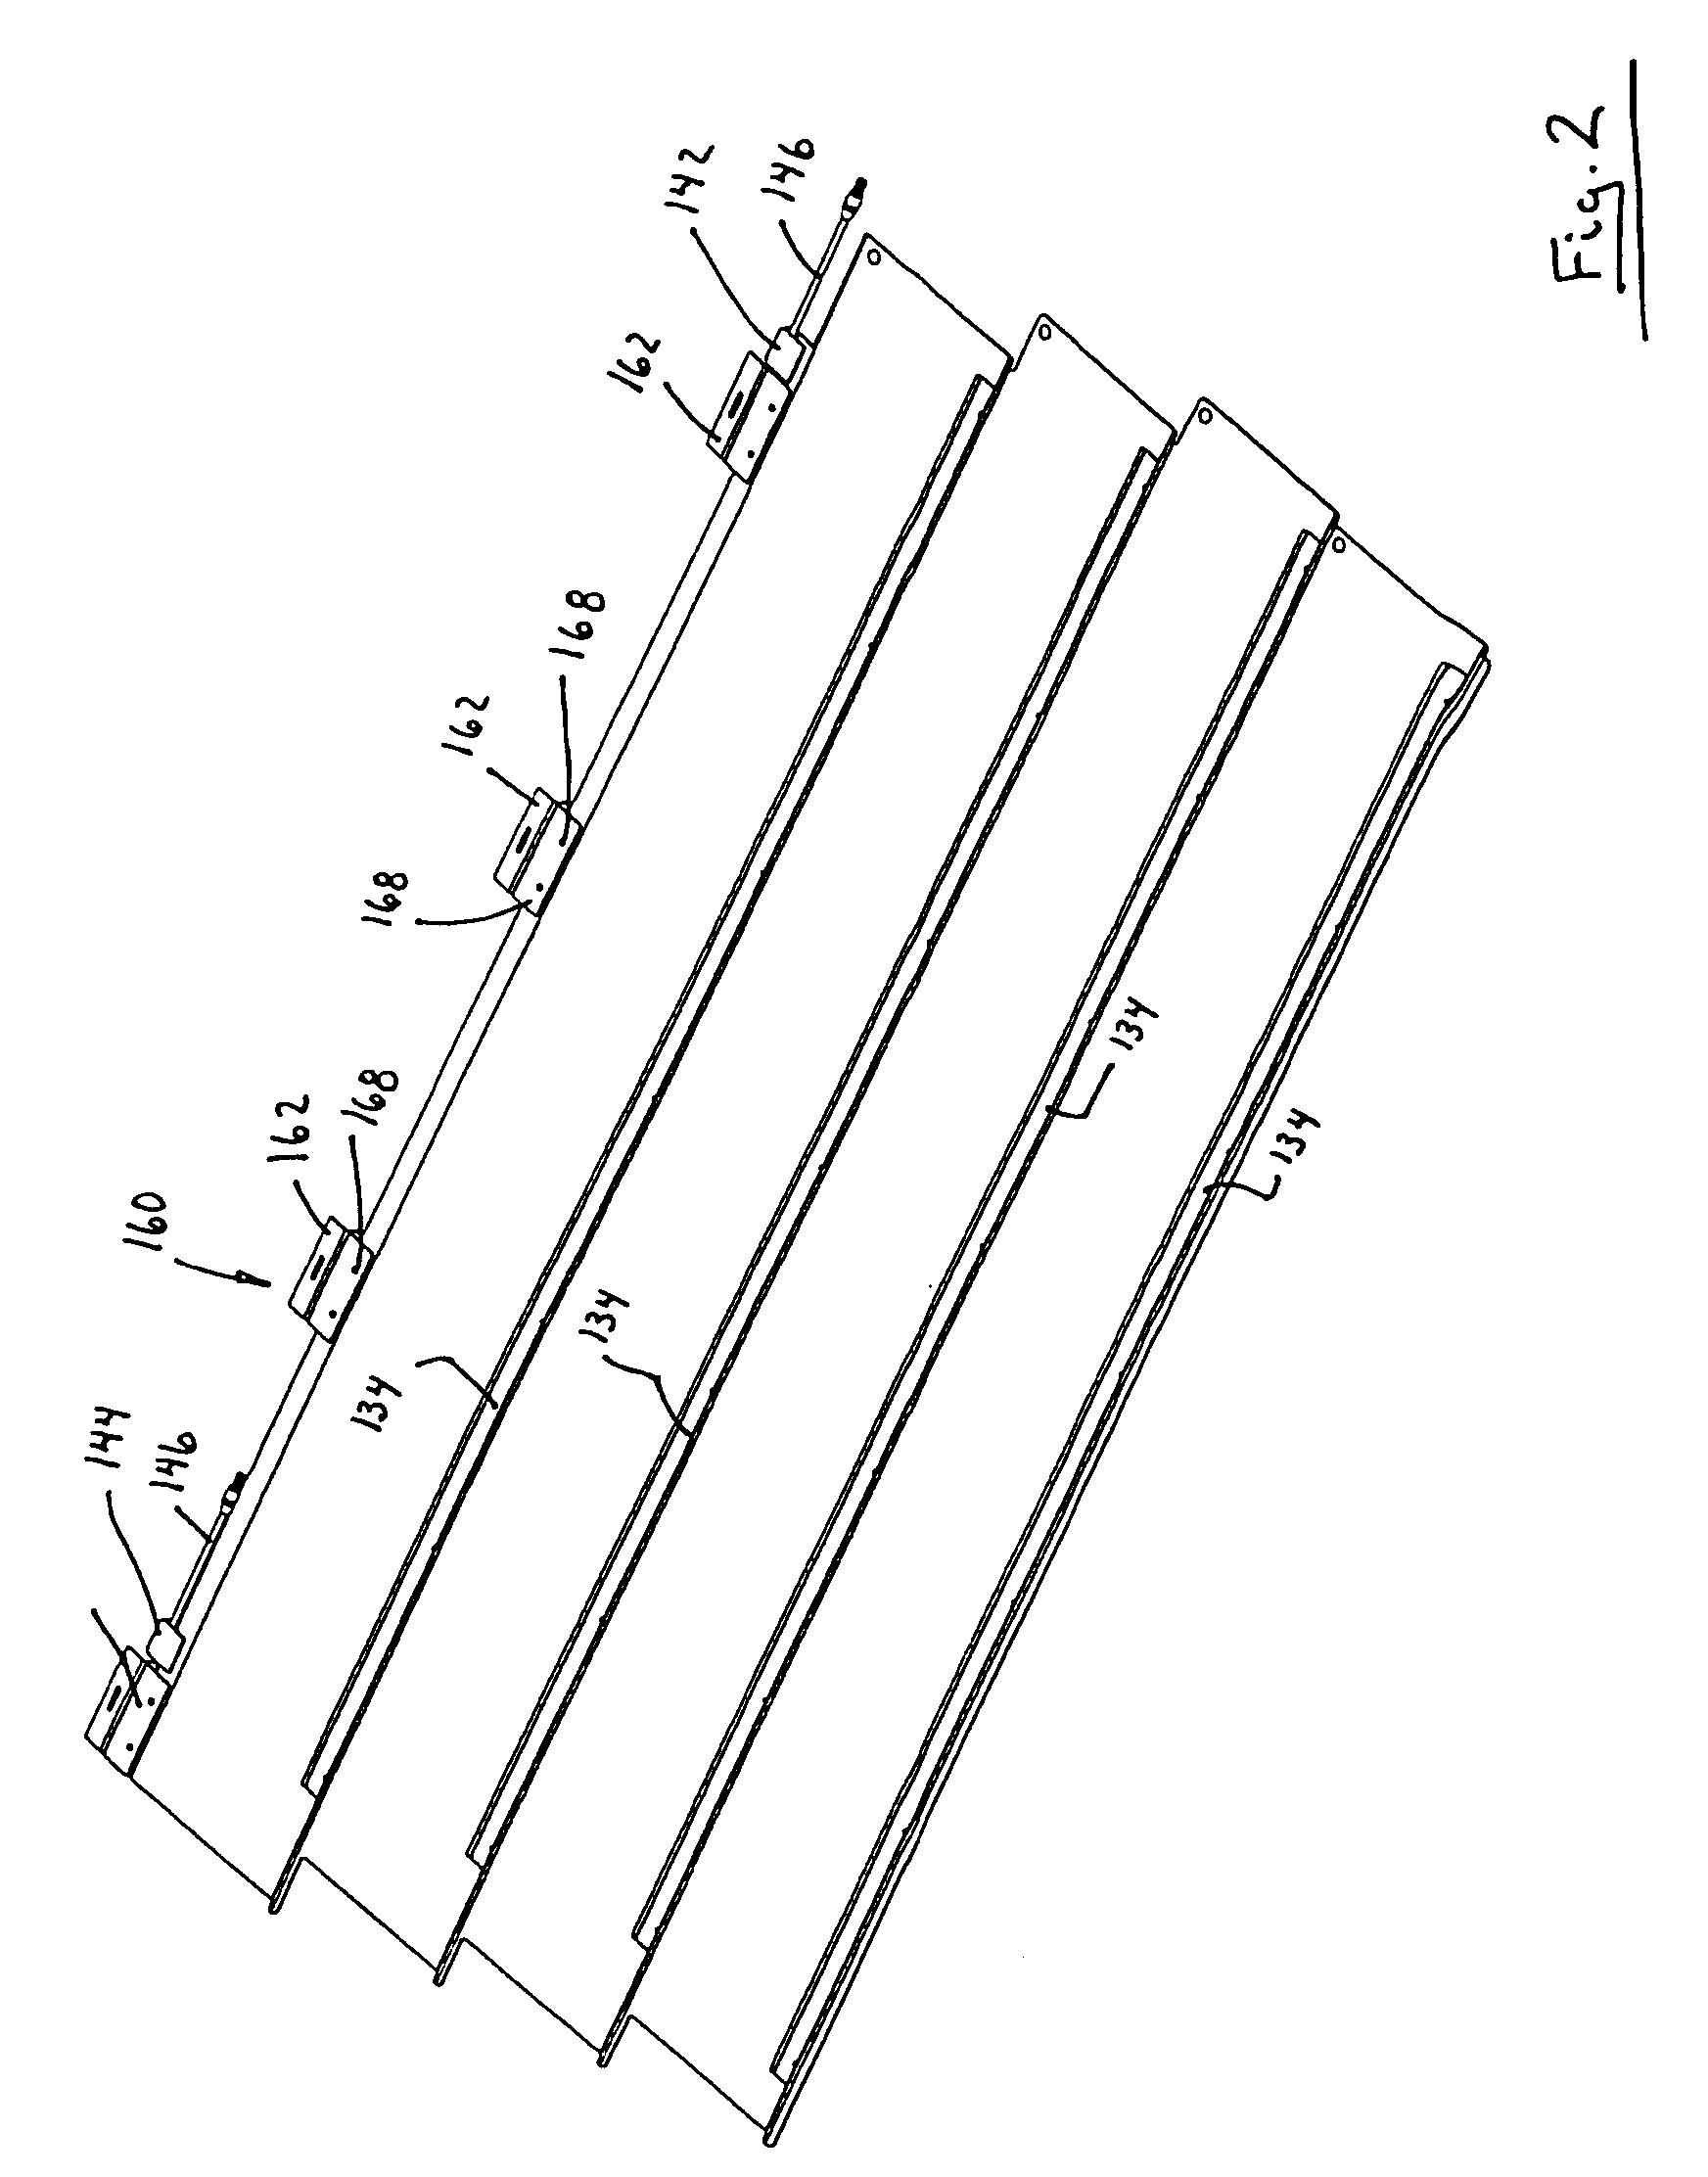 Solar panel overlay and solar panel overlay assembly